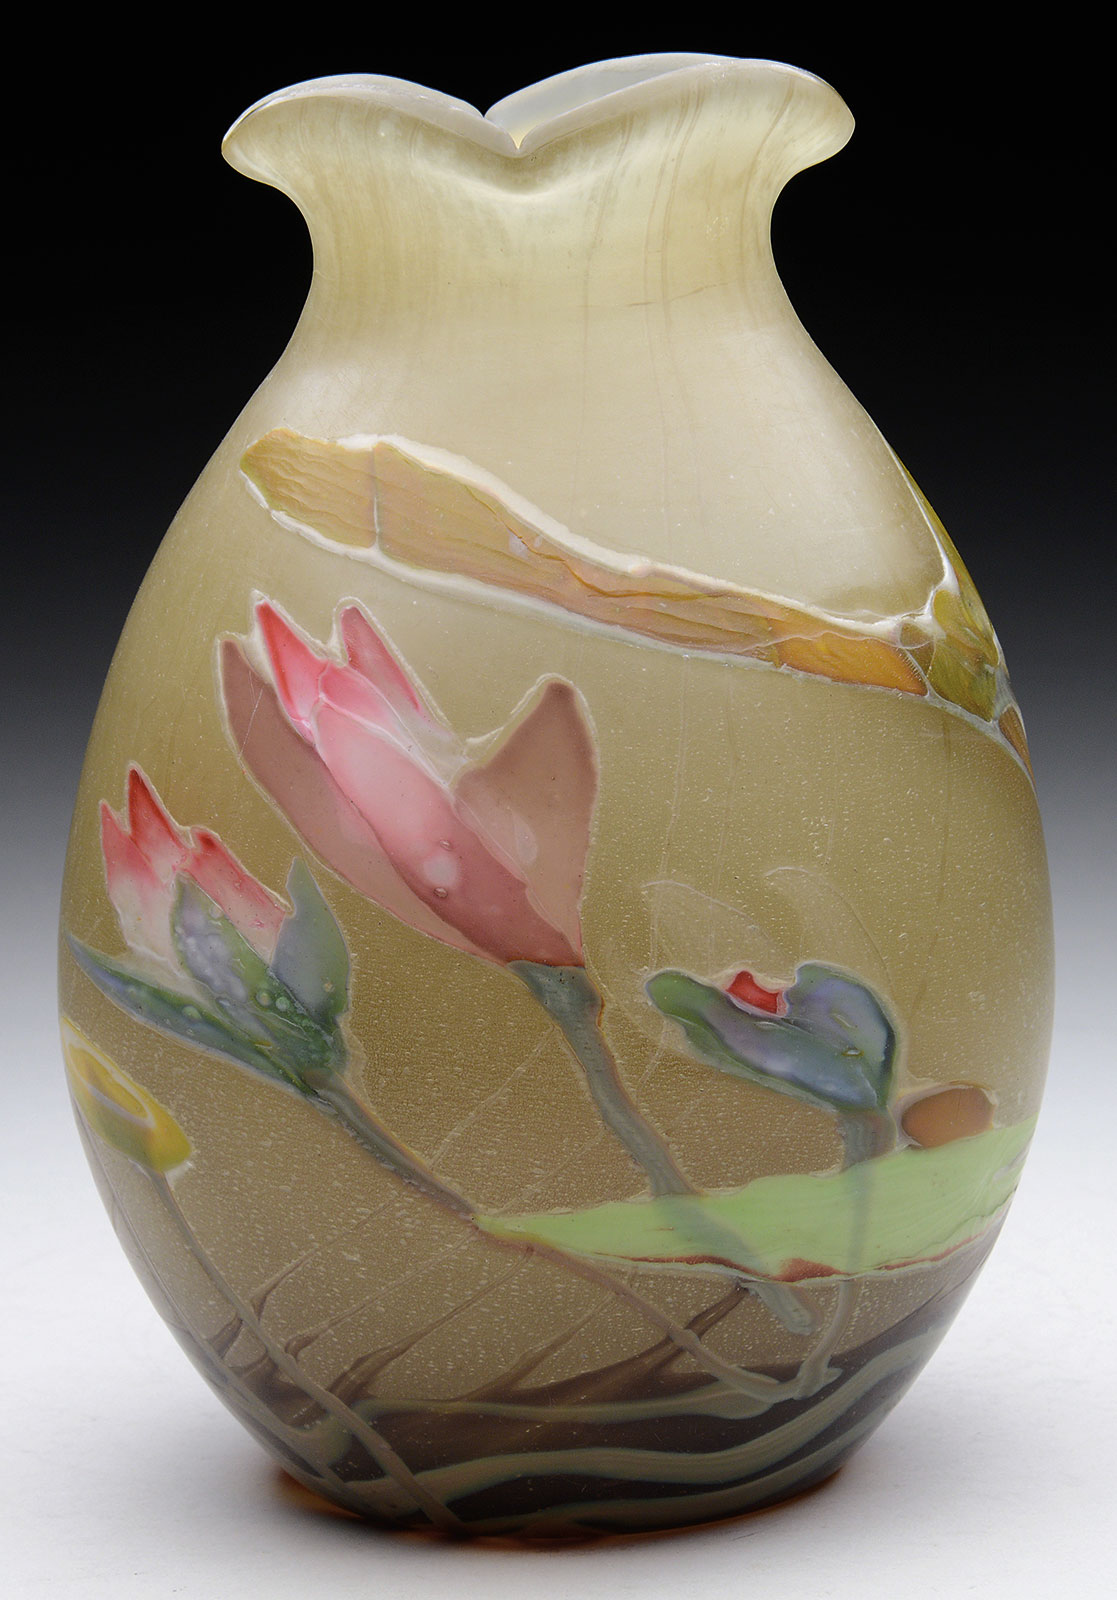 Galle Marquetry Nenuphars Vase, estimated at $60,000-80,000.